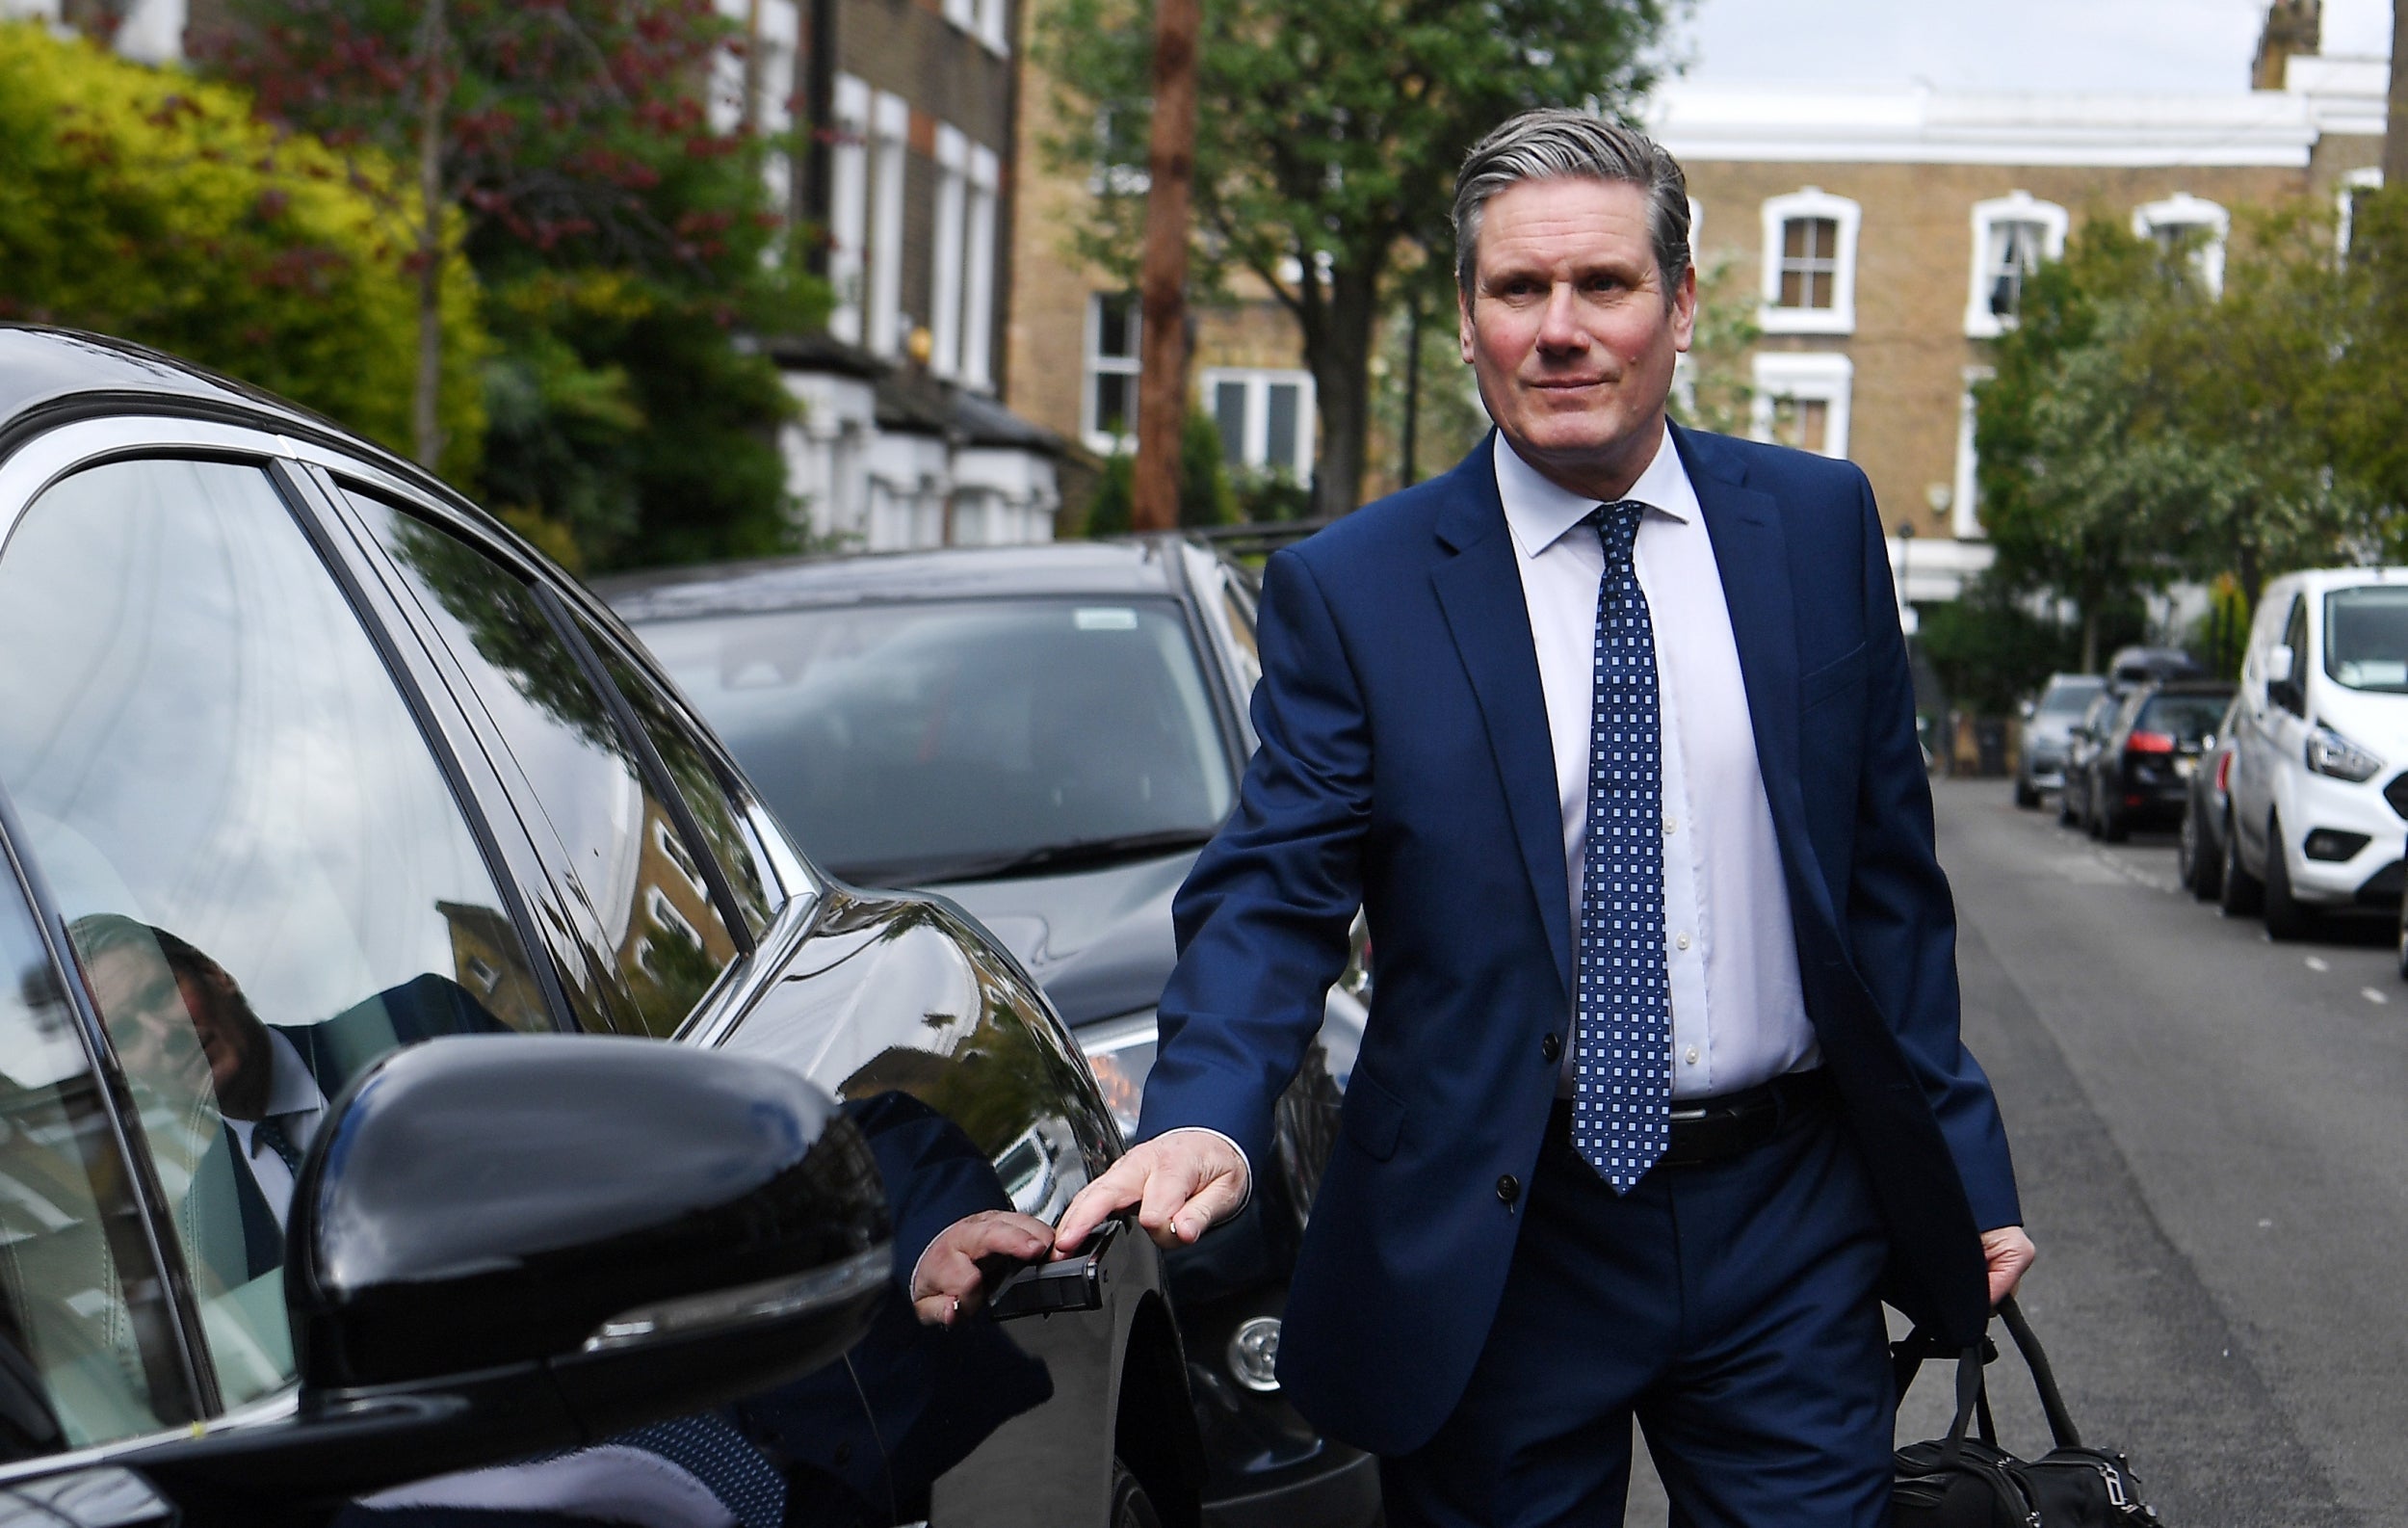 Keir Starmer has pursued a strategy of 'restrained helpfulness' since he was elected Labour leader